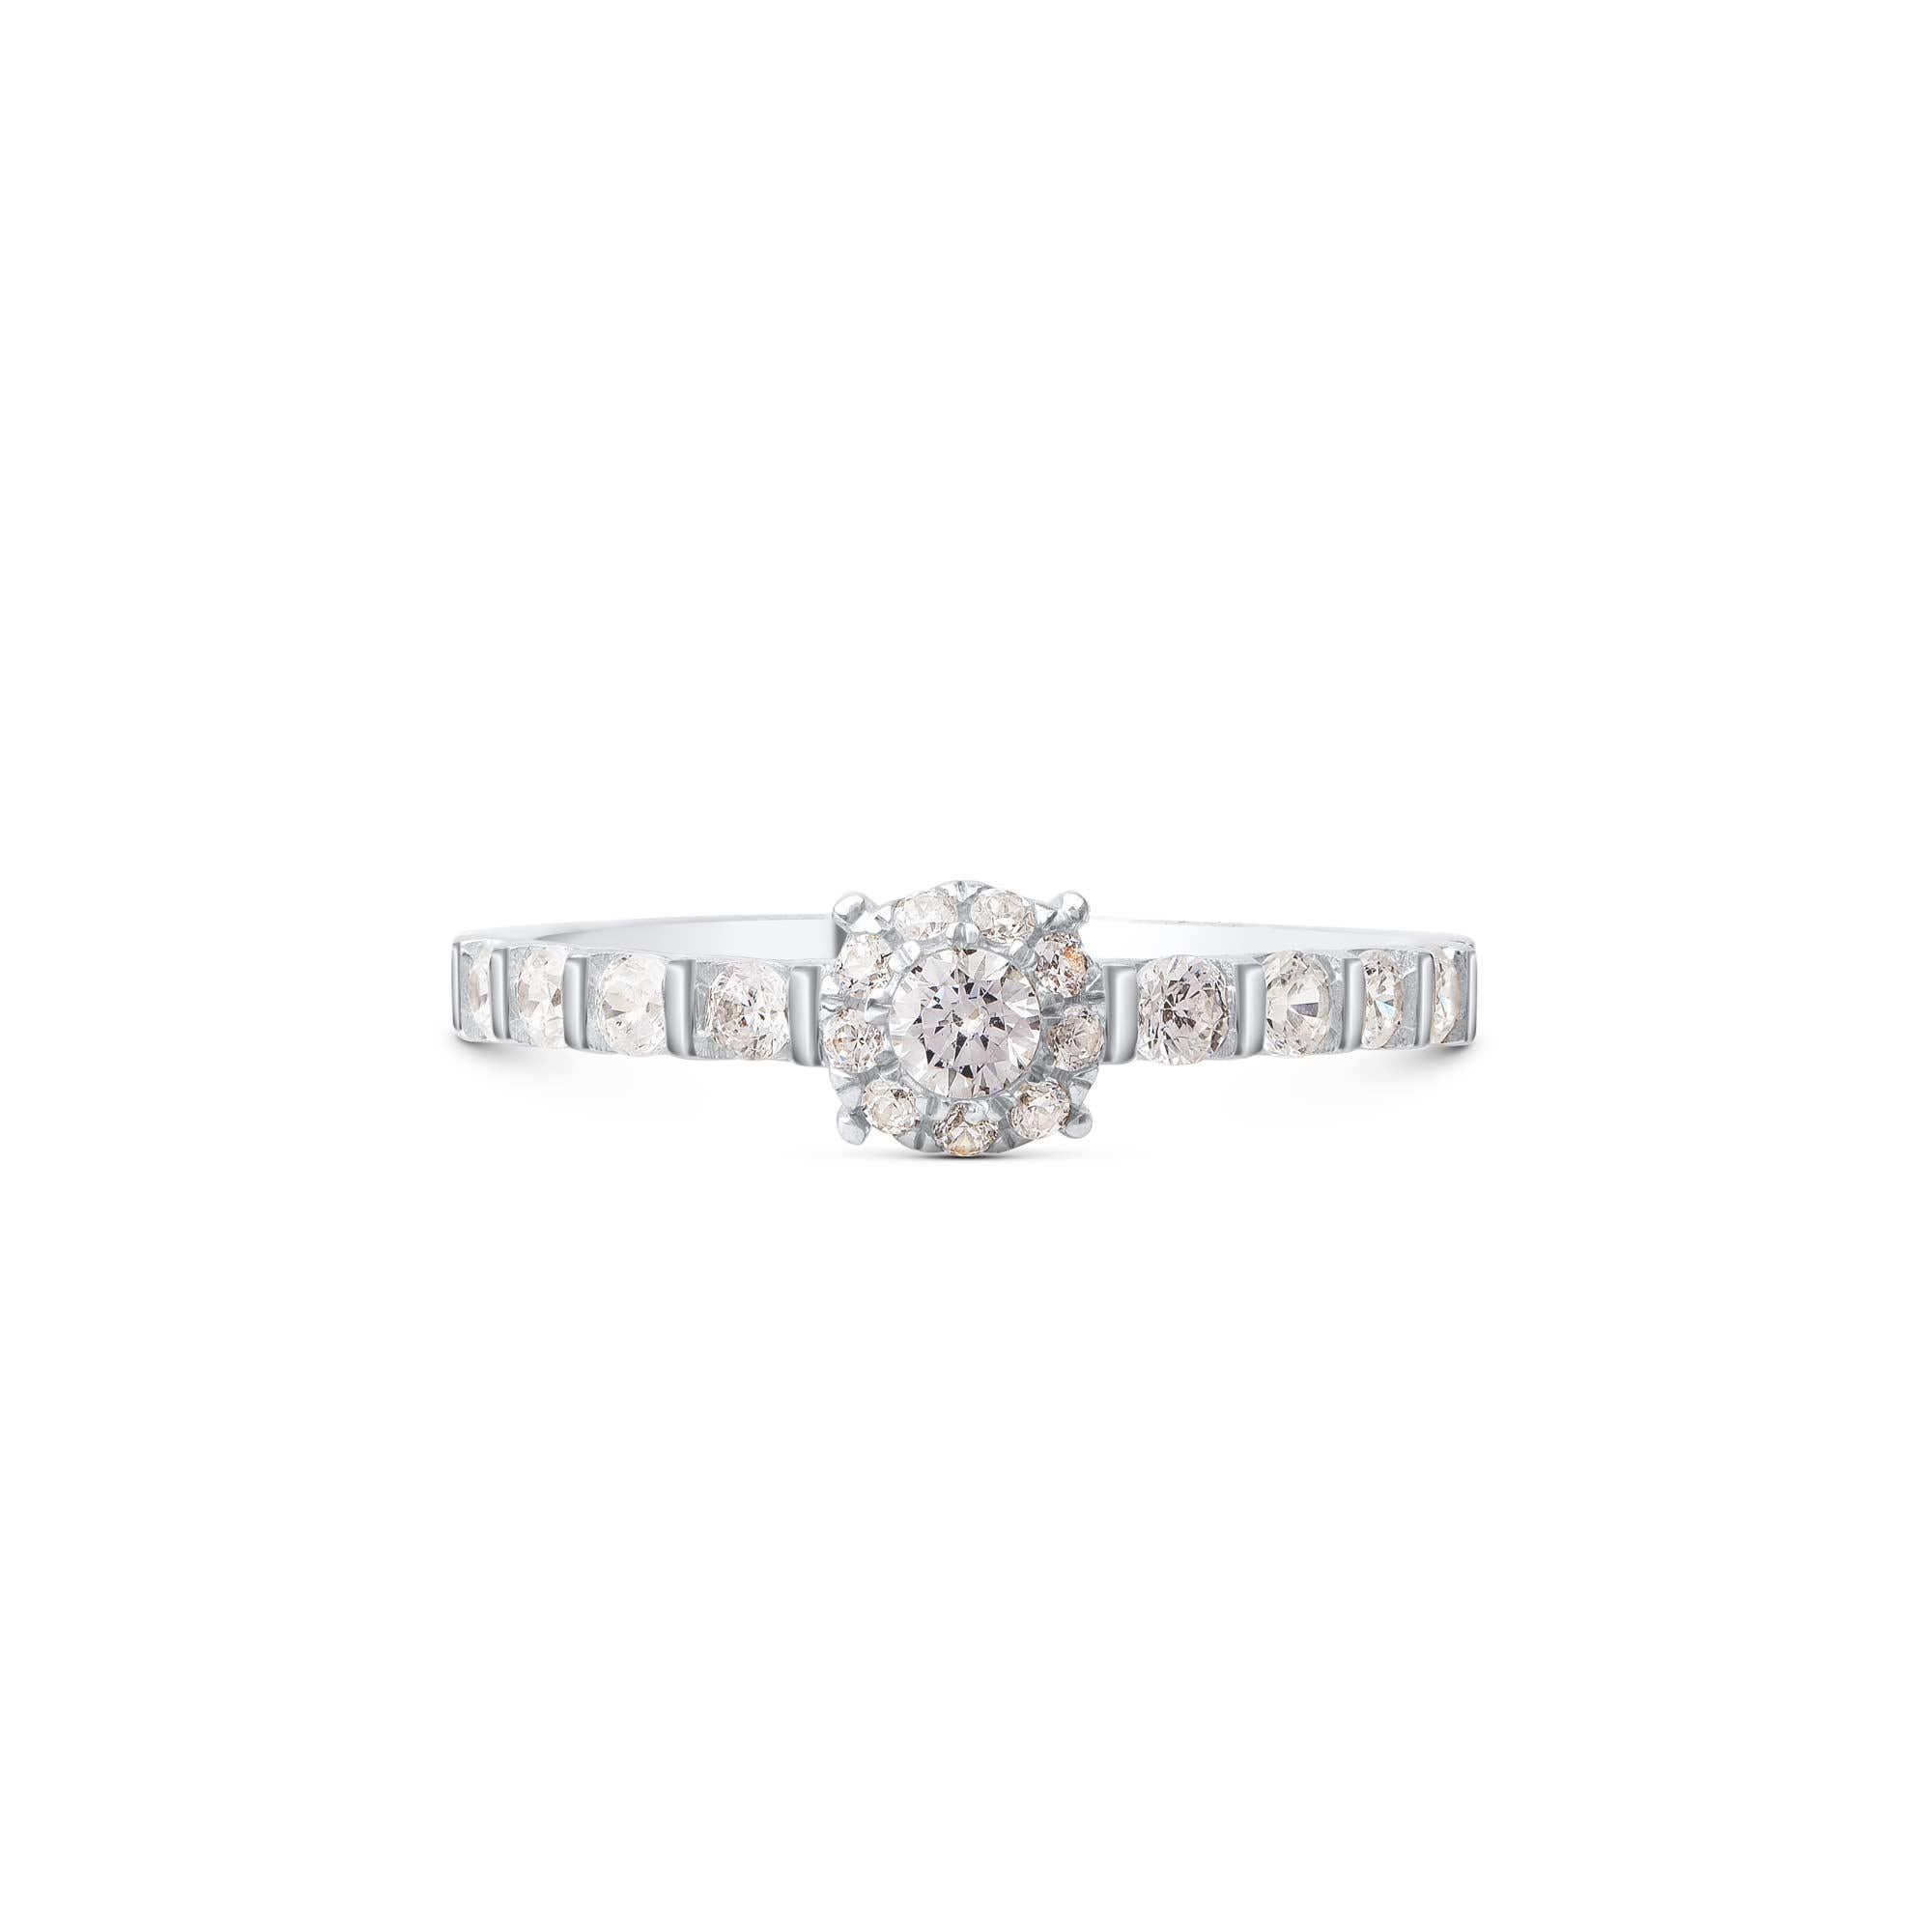 Crafted to perfection in 18 kt white gold and embedded with 18 brilliant natural diamonds in prong and channel setting. Diamonds are graded H-I Color, I1 Clarity.  

Metal color and ring size can be customized on request. 

This piece is made to